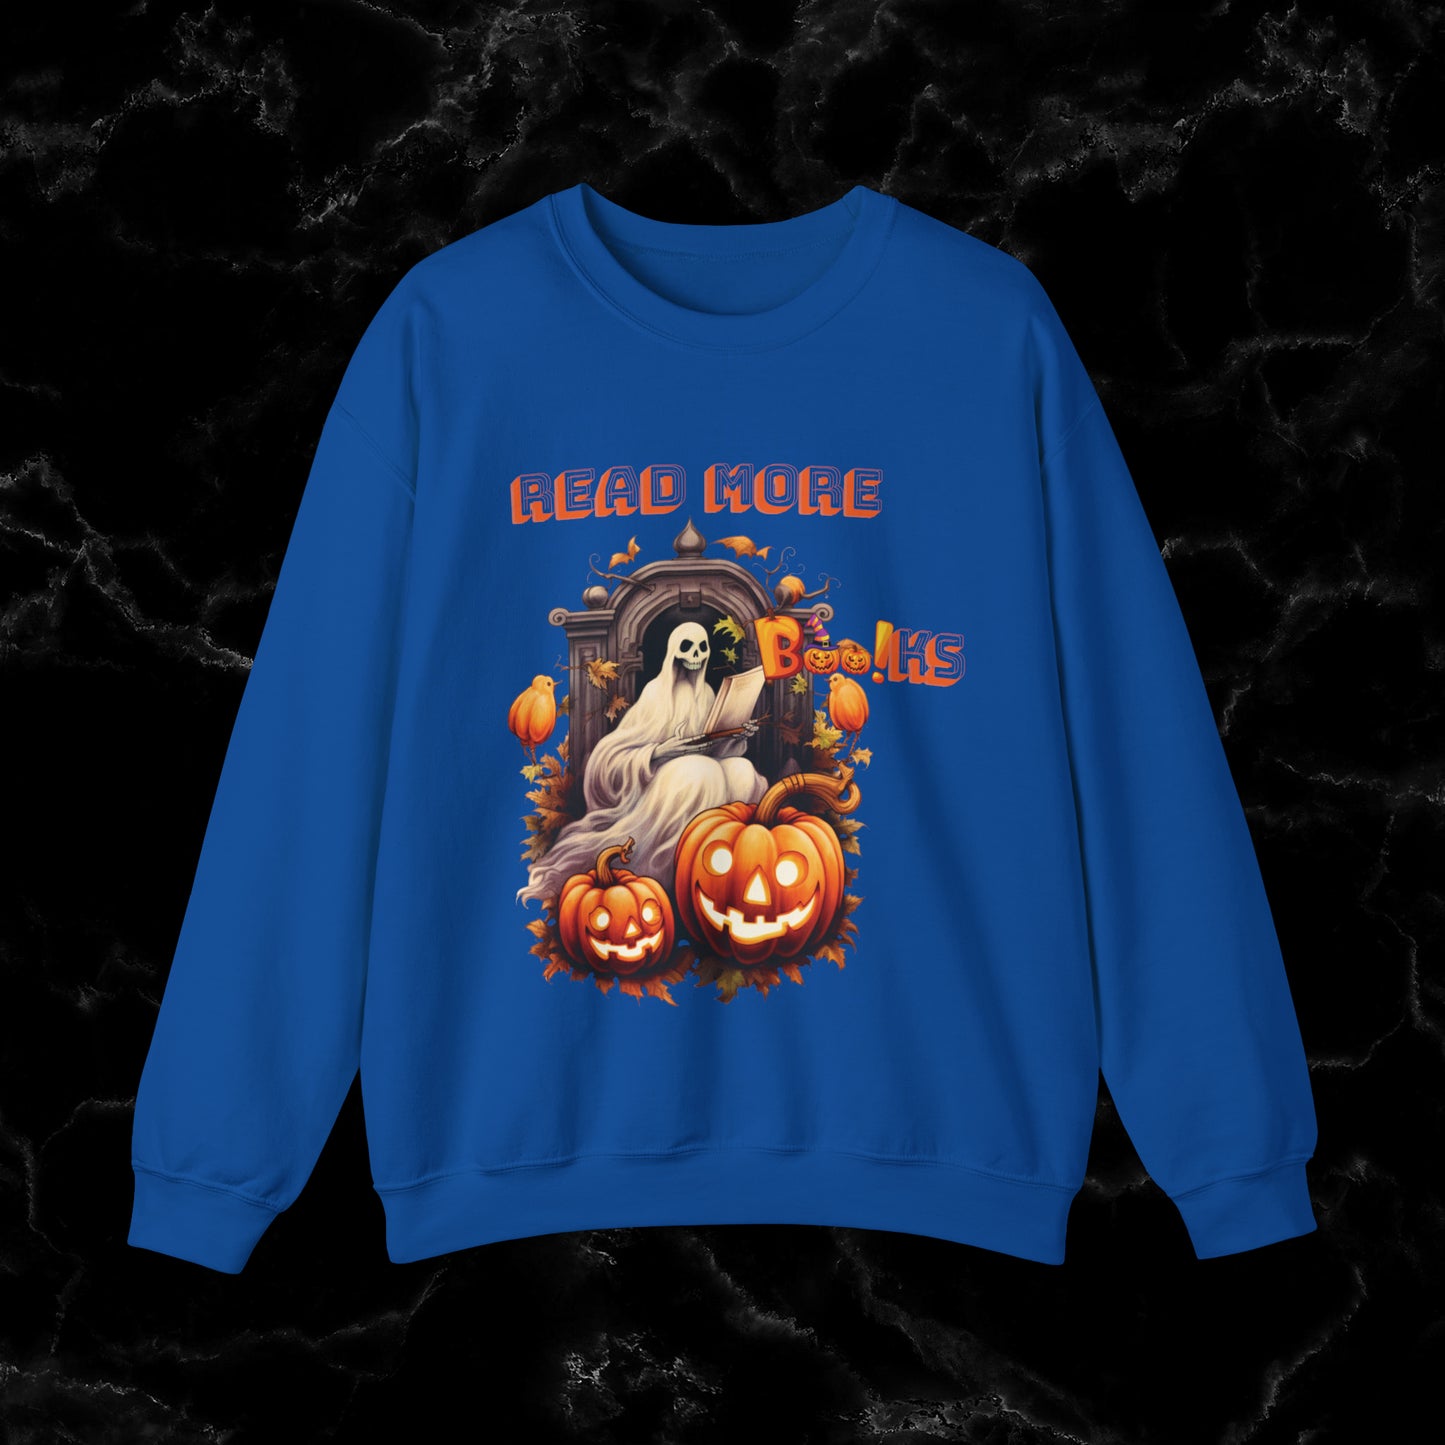 Read More Books Sweatshirt - Book Lover Halloween Sweater for Librarians and Students Sweatshirt S Royal 